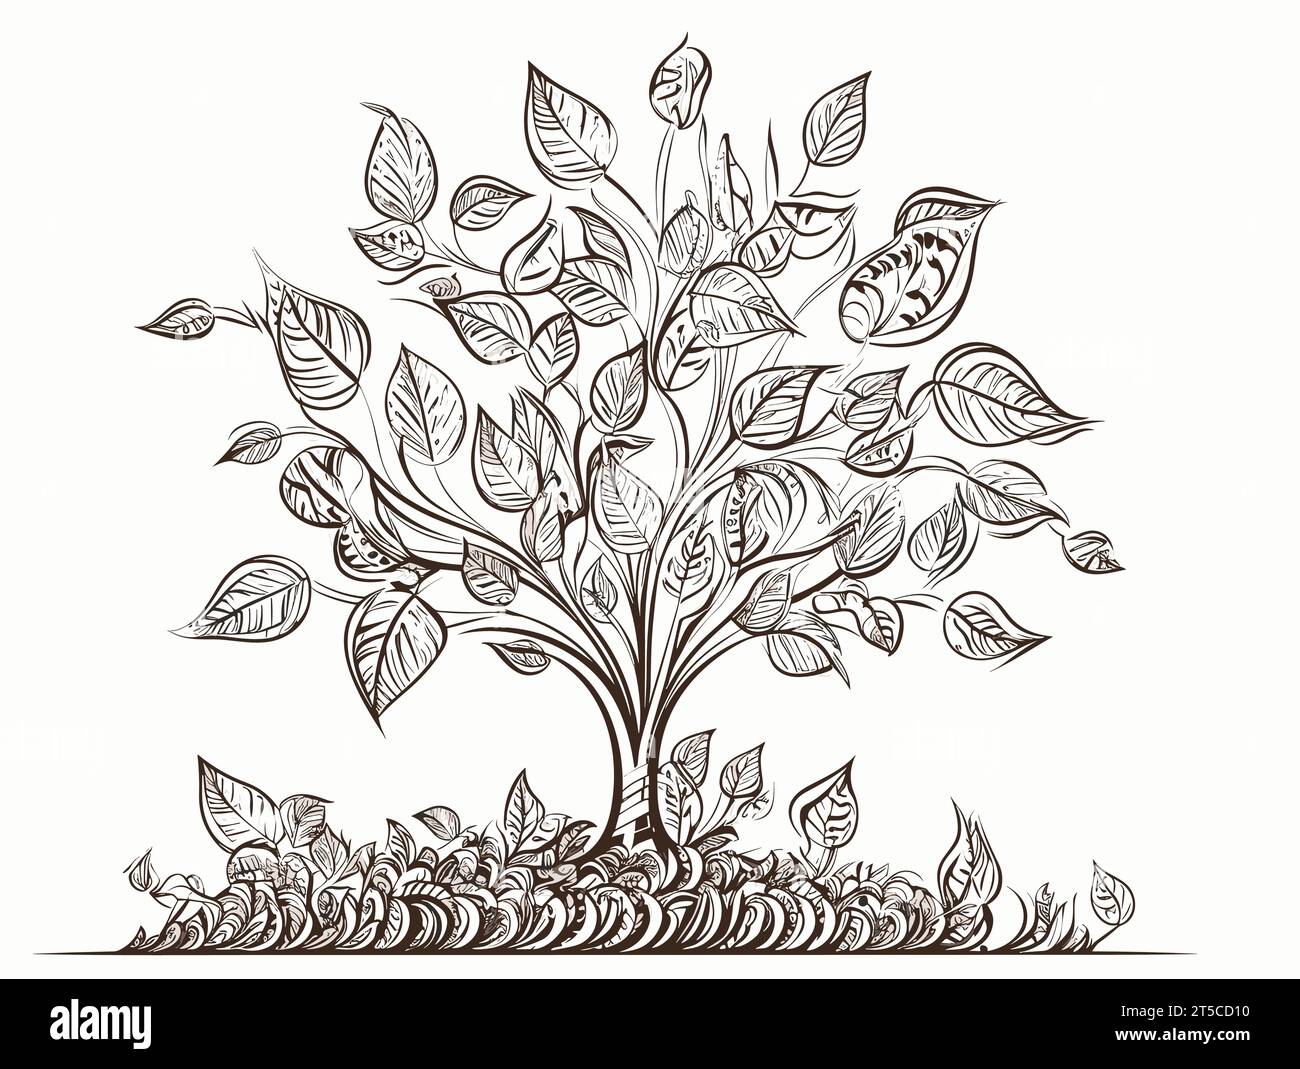 Drawing of Growing investment concept illustration separated, sweeping overdrawn lines. Stock Vector